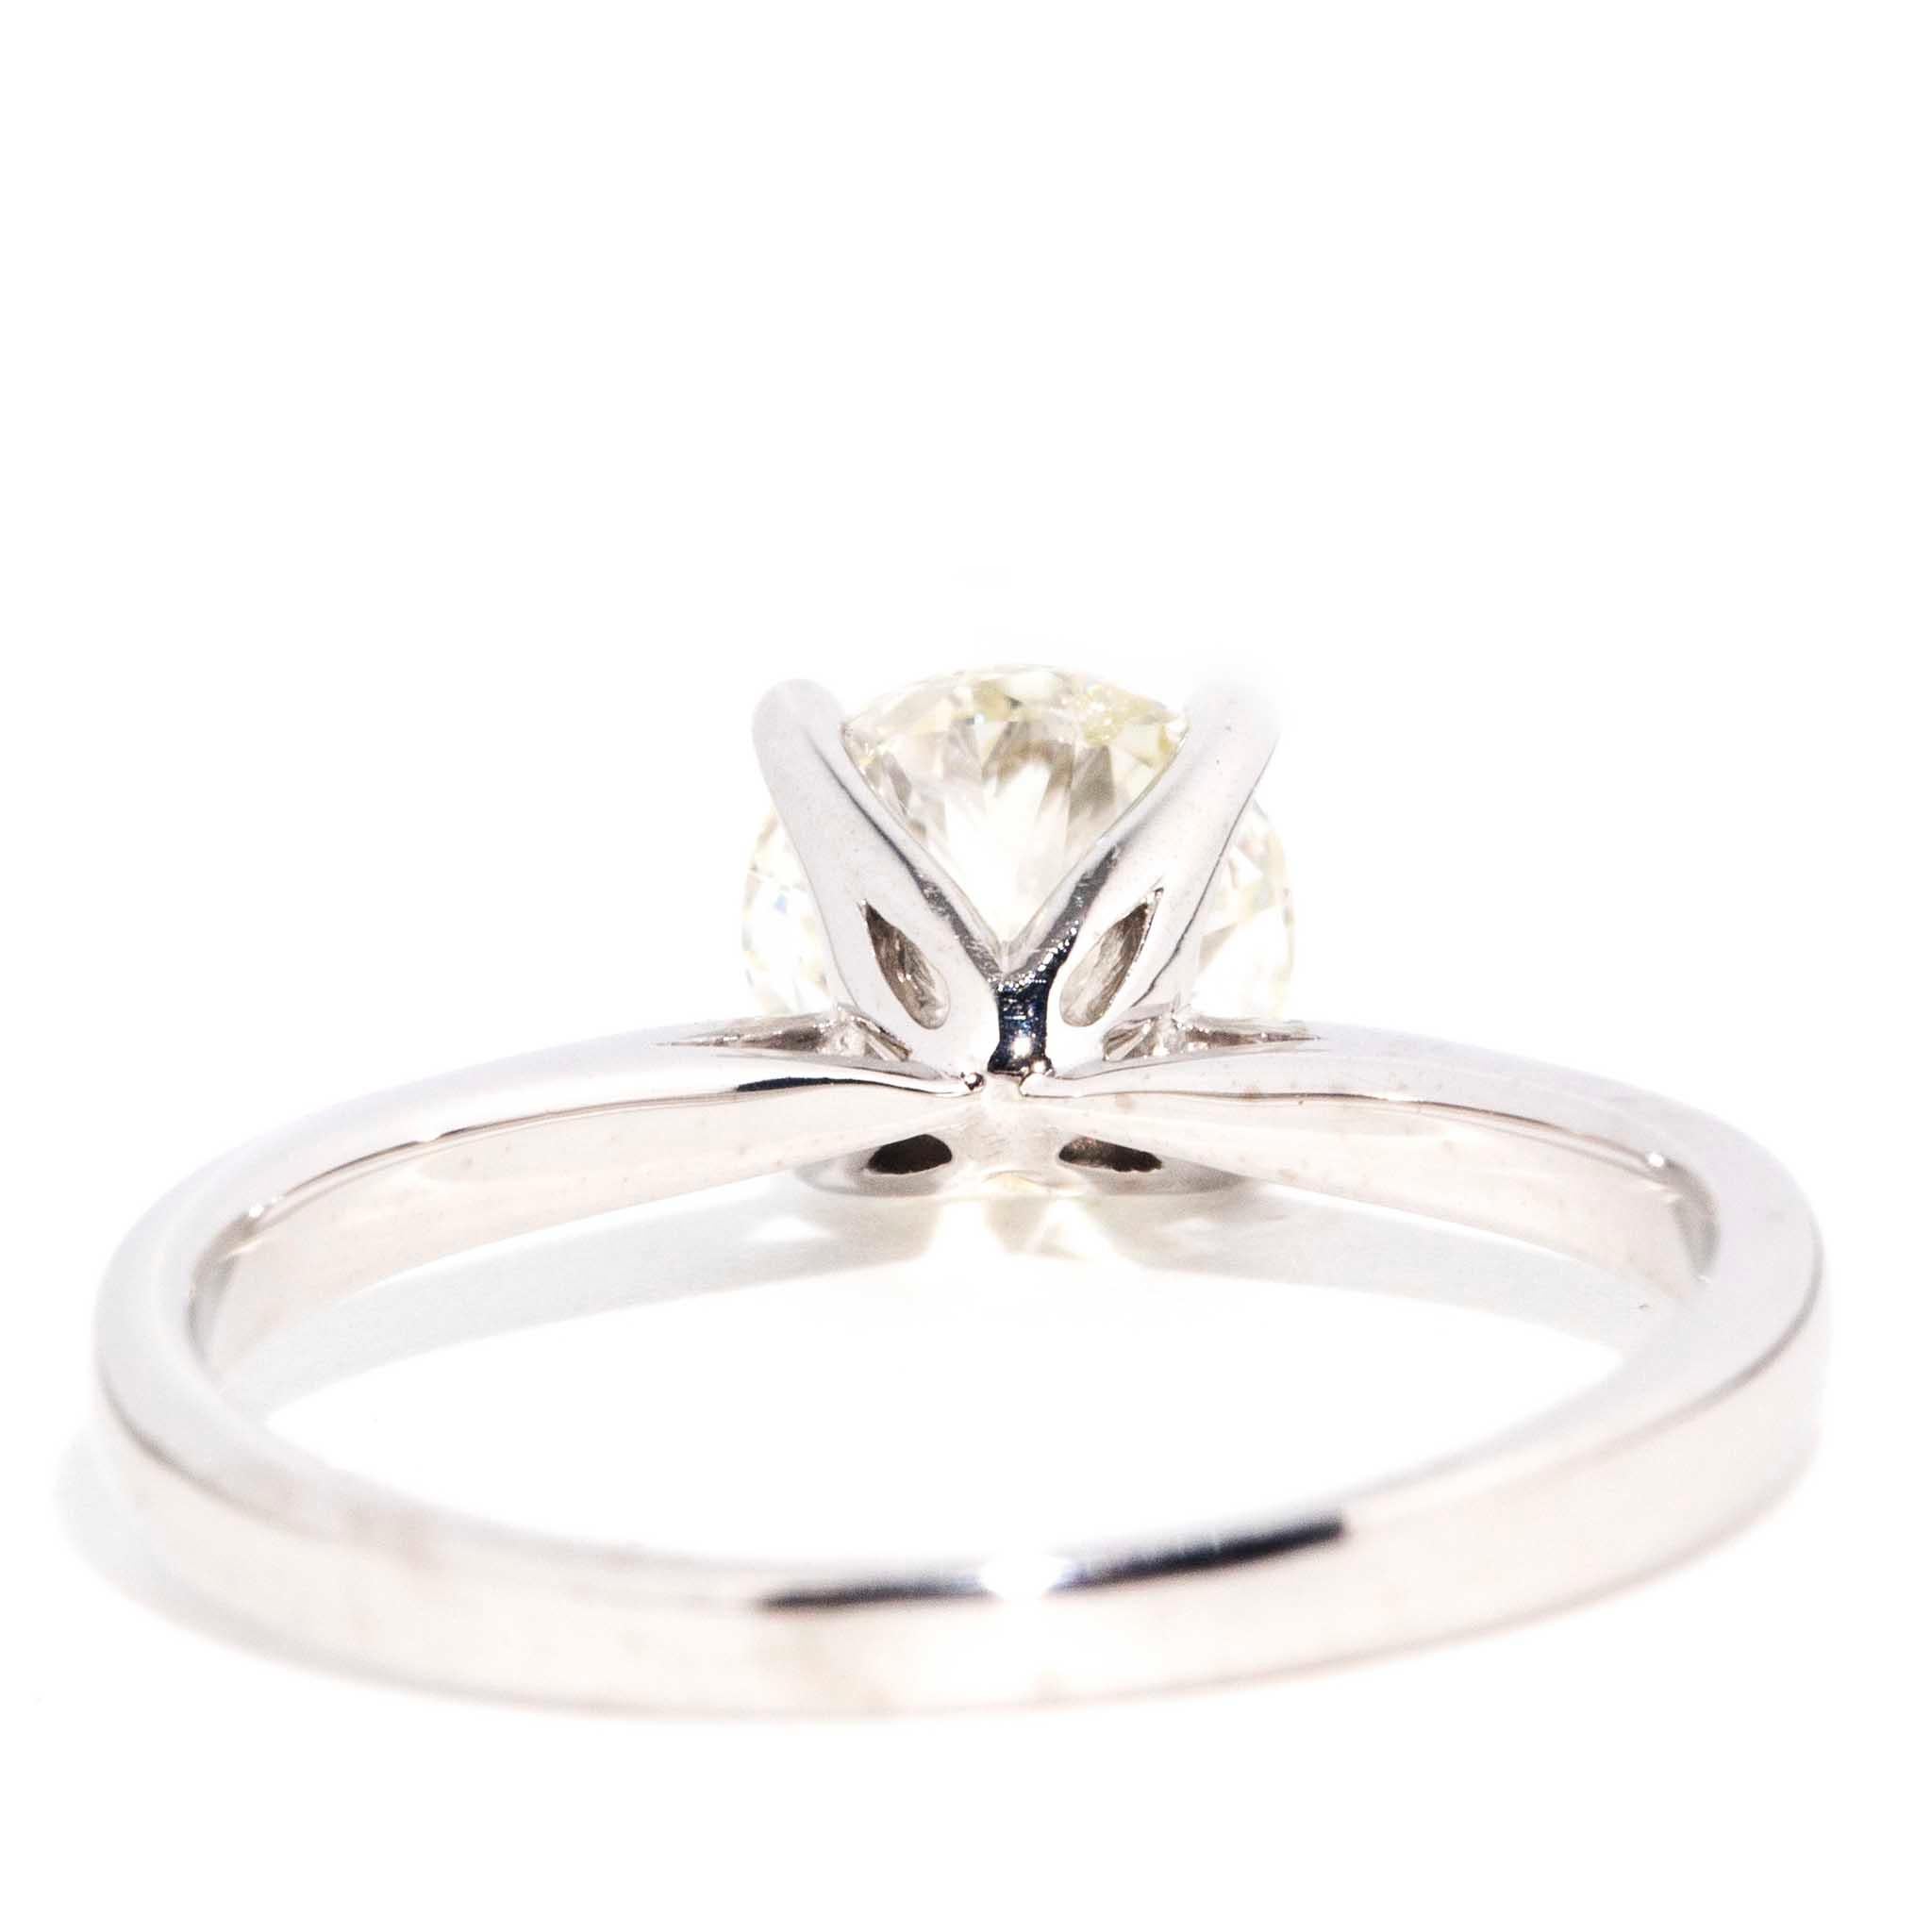 Contemporary 0.93 Carat 18 Carat White Gold Diamond Solitaire Engagement Ring 4